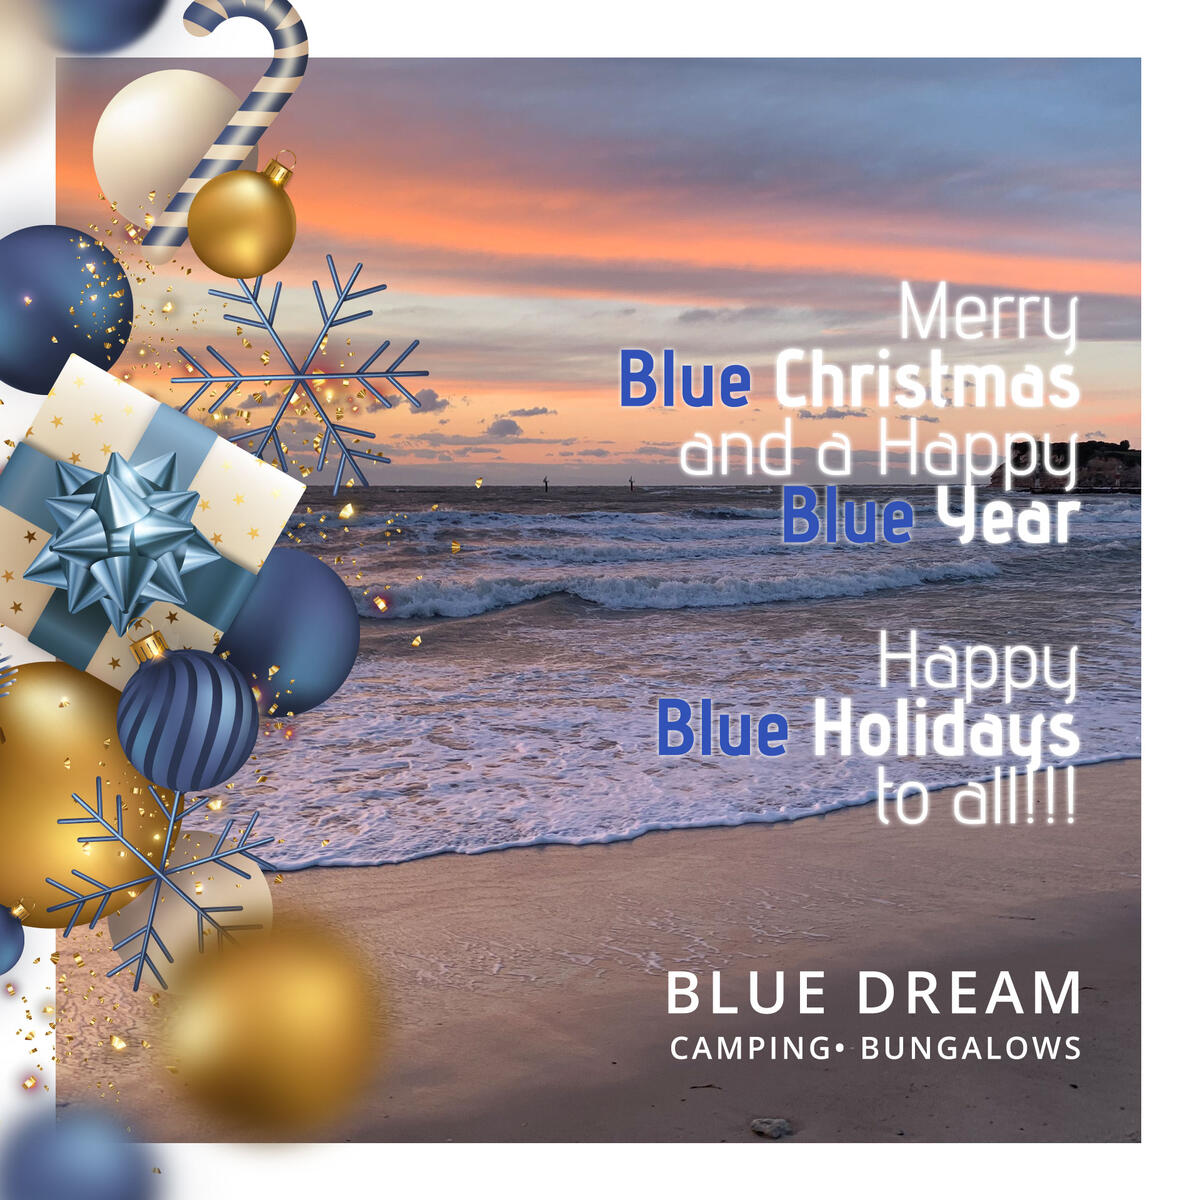 Merry Blue Christmas and a Happy Blue Year